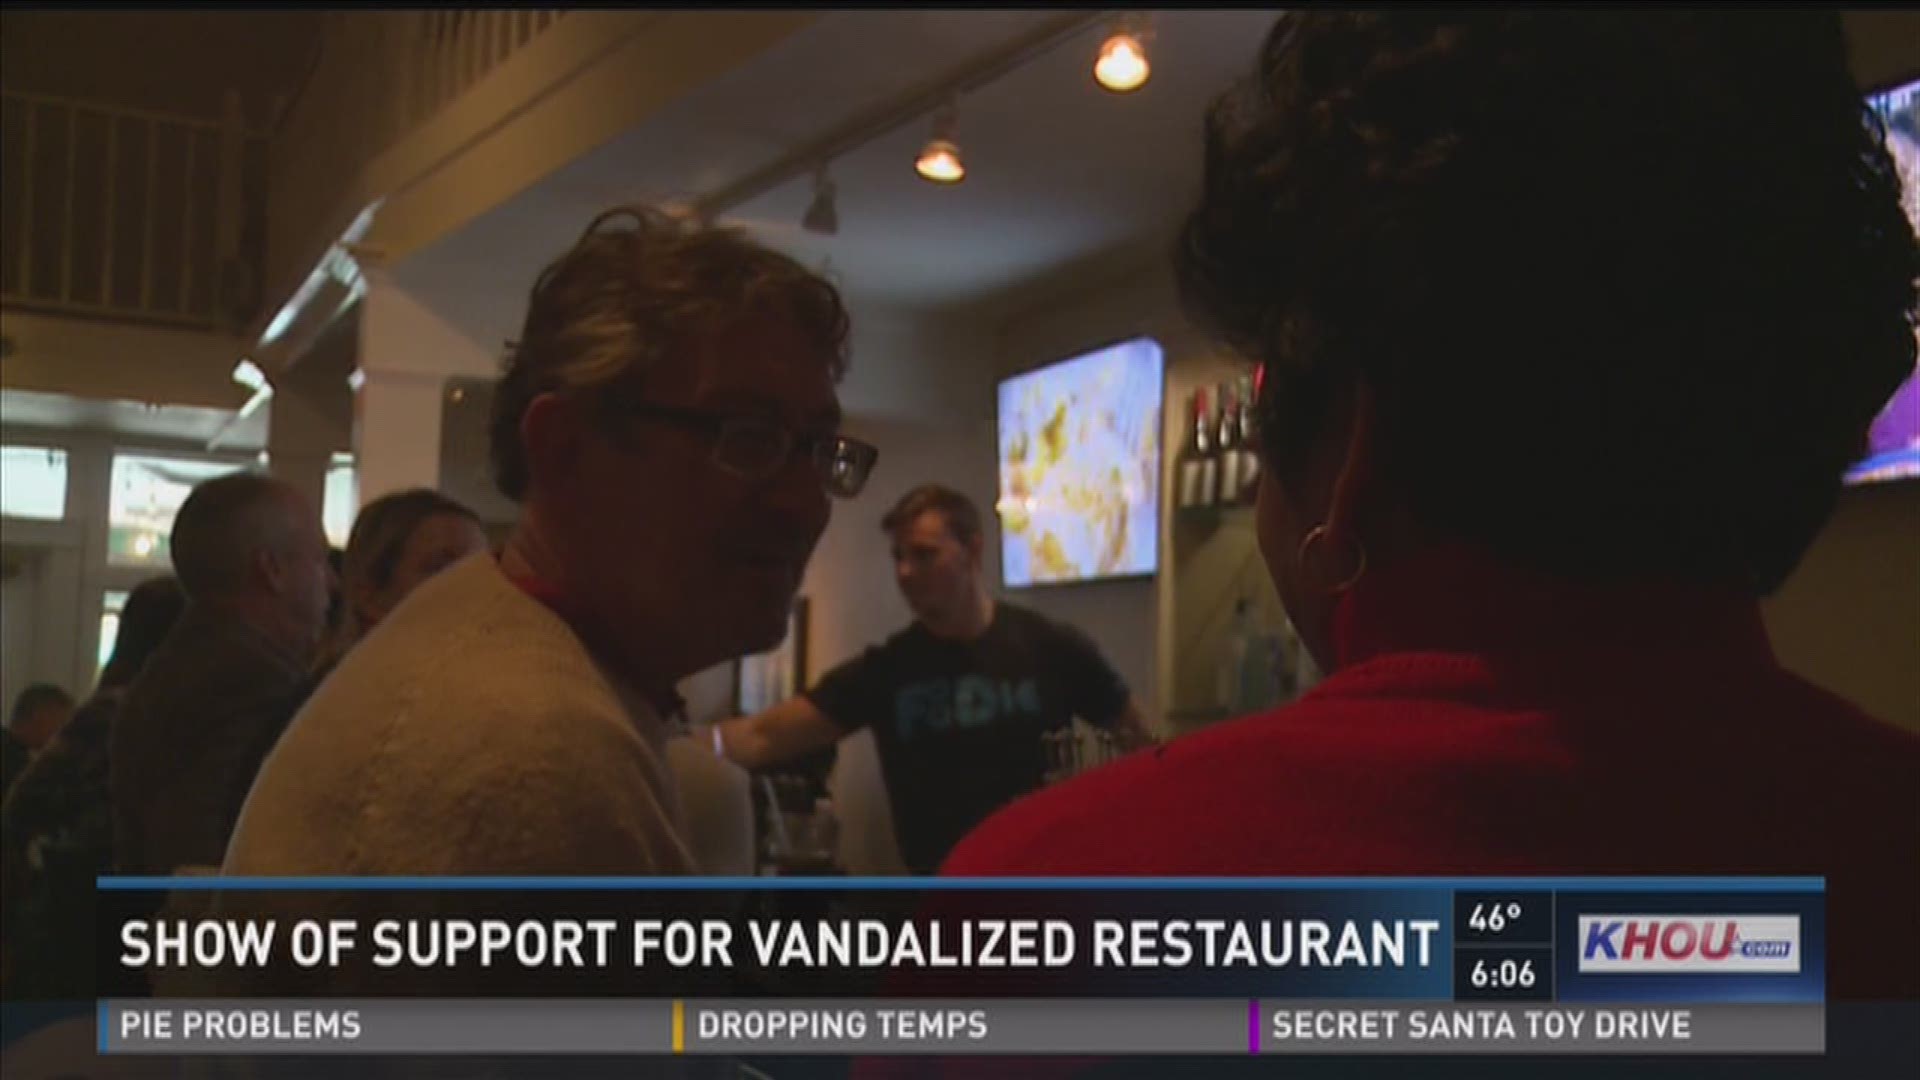 There's been an outpouring of support for a Muslim restaurant owner in Galveston.